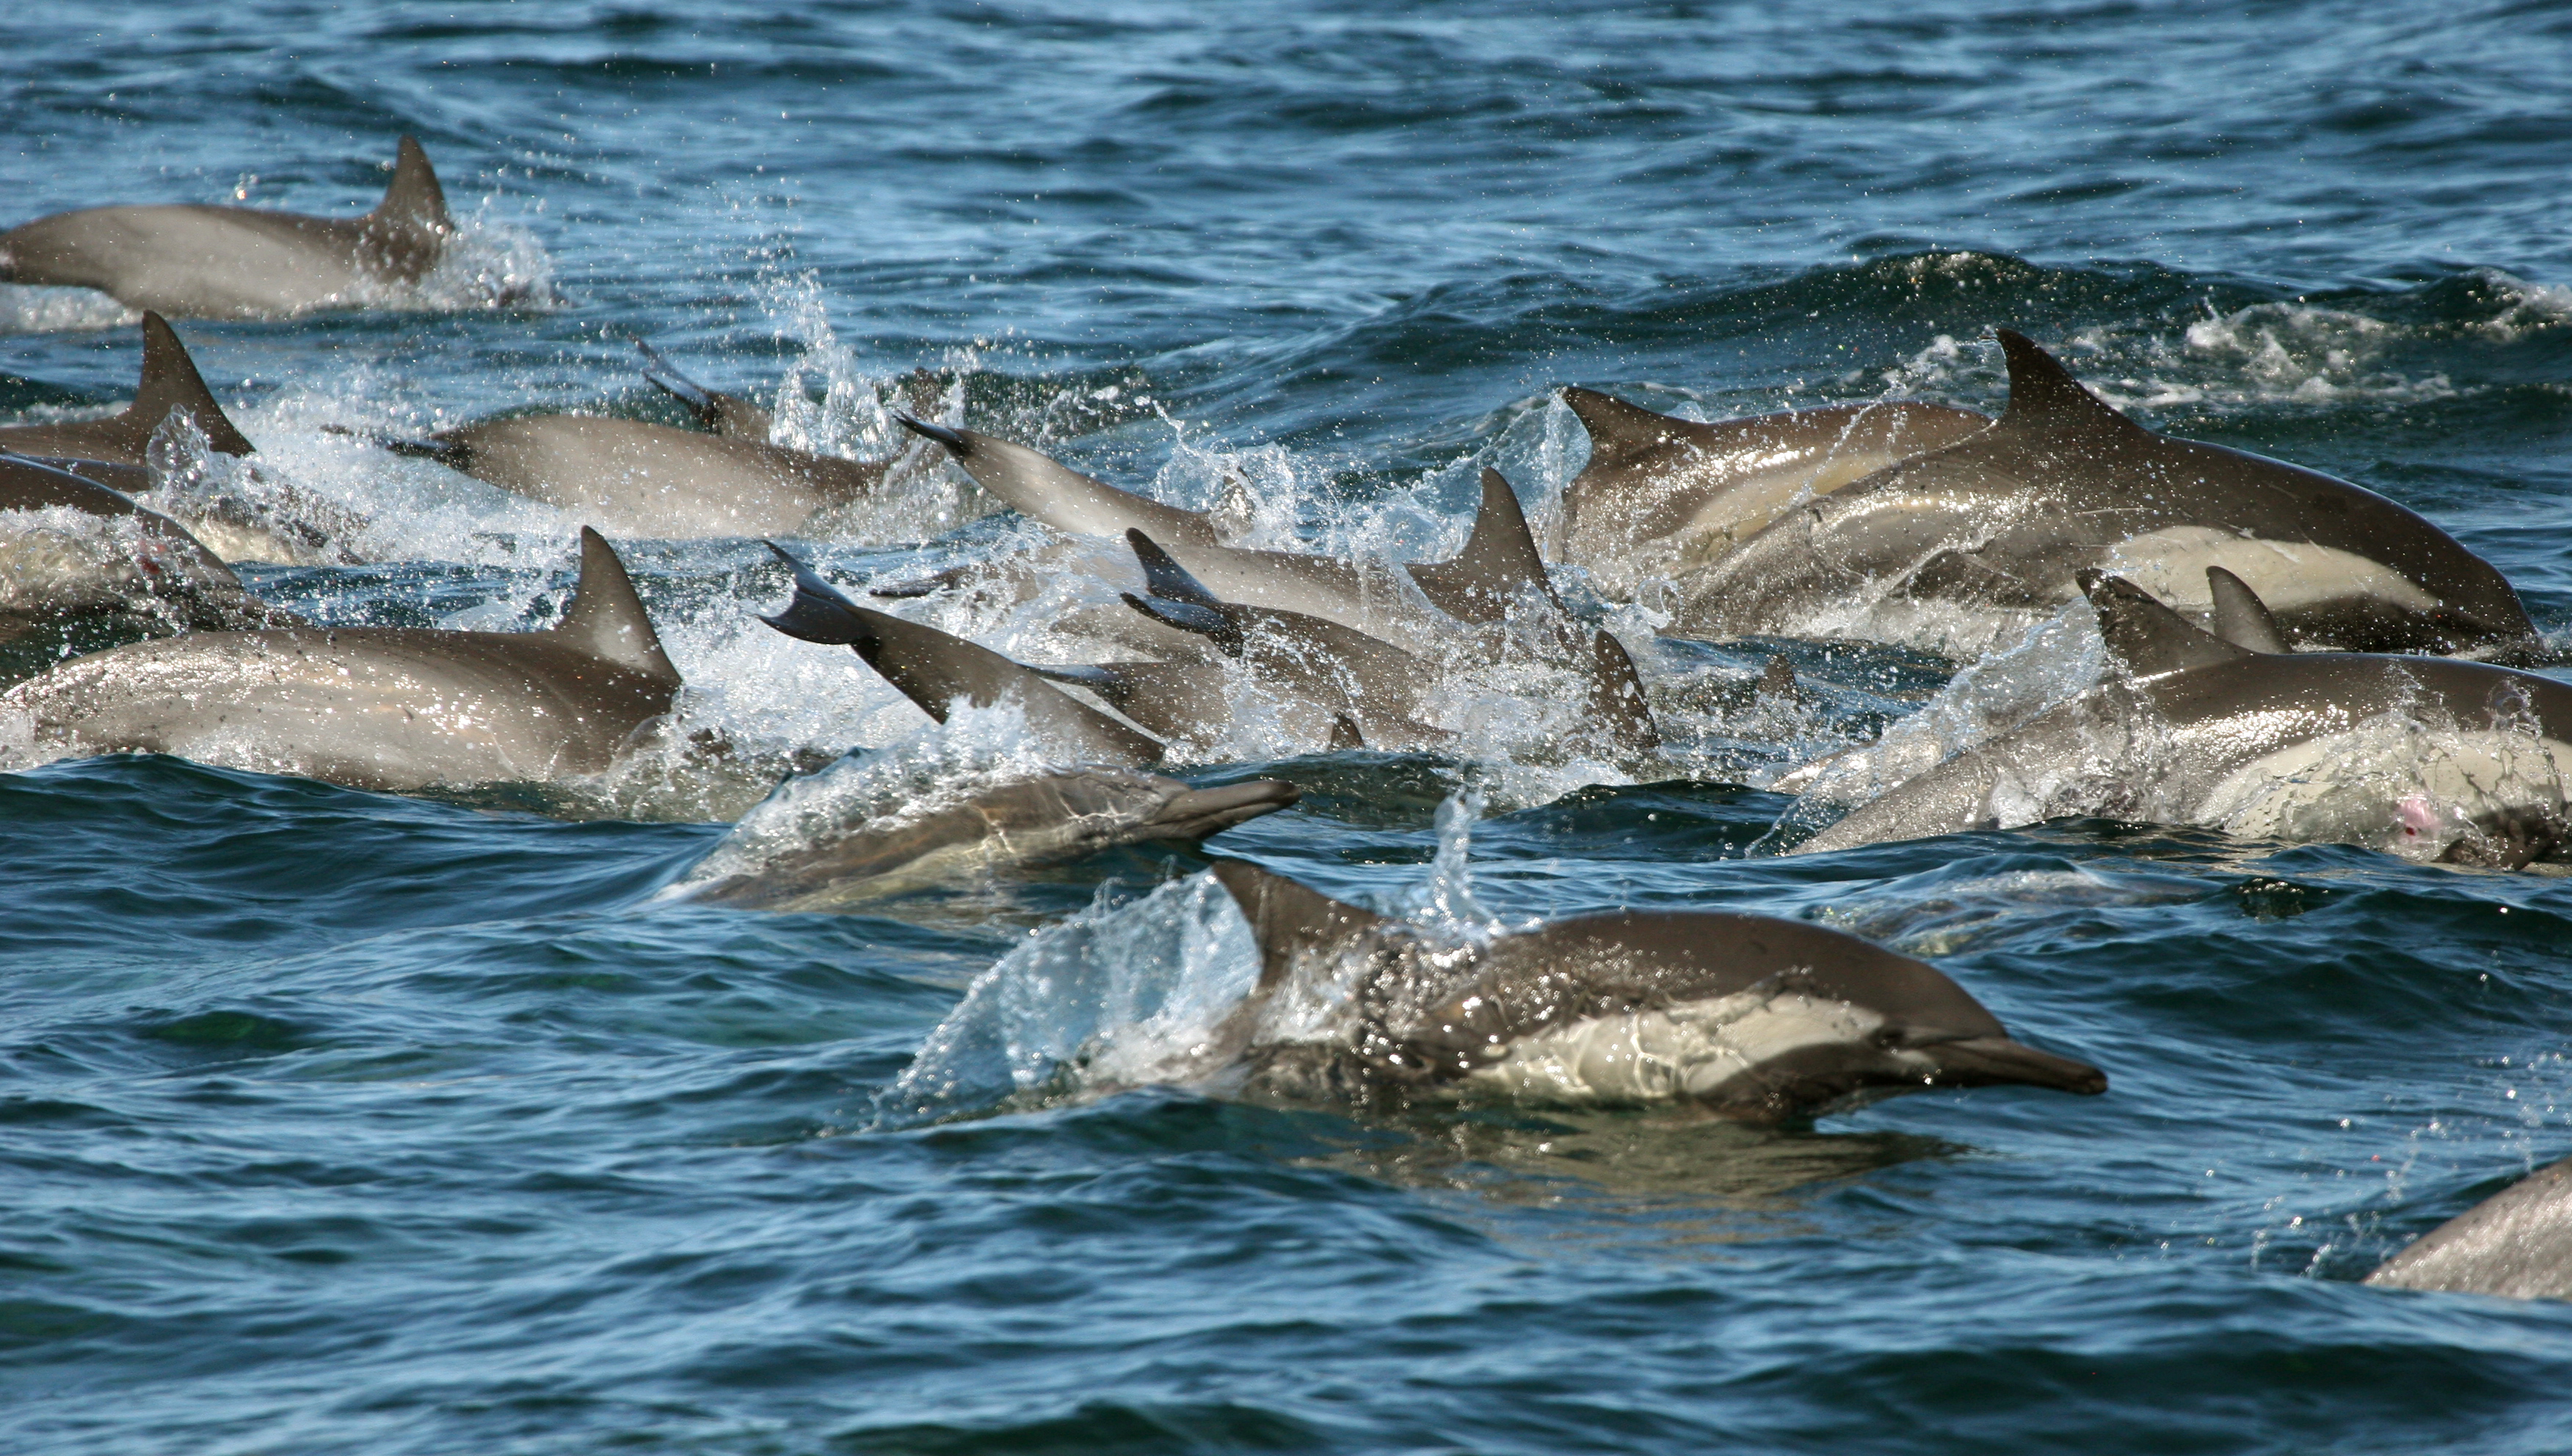 Short-beaked common dolphins in the proposed Alborán Sea Marine Protected Area, the most diverse area of the western Mediterranean. This dolphin has the IUCN Red List rating of Endangered in the Mediterranean and needs urgent habitat protection here....